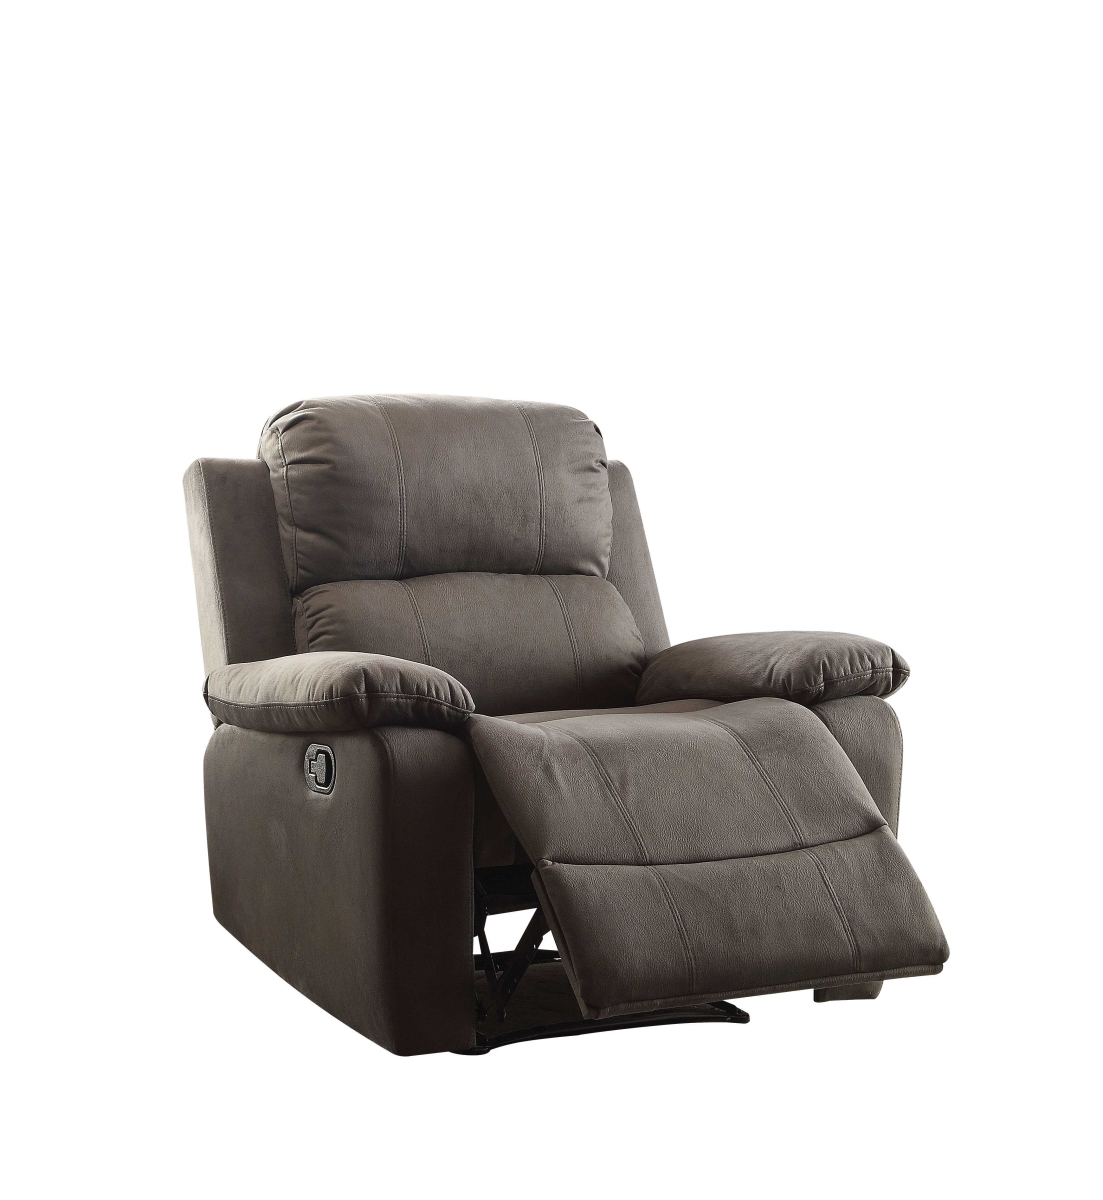 Home Roots Furniture 286177 39 X 38 X 38 In. Polished Microfiber Fabric Recliner - Charcoal